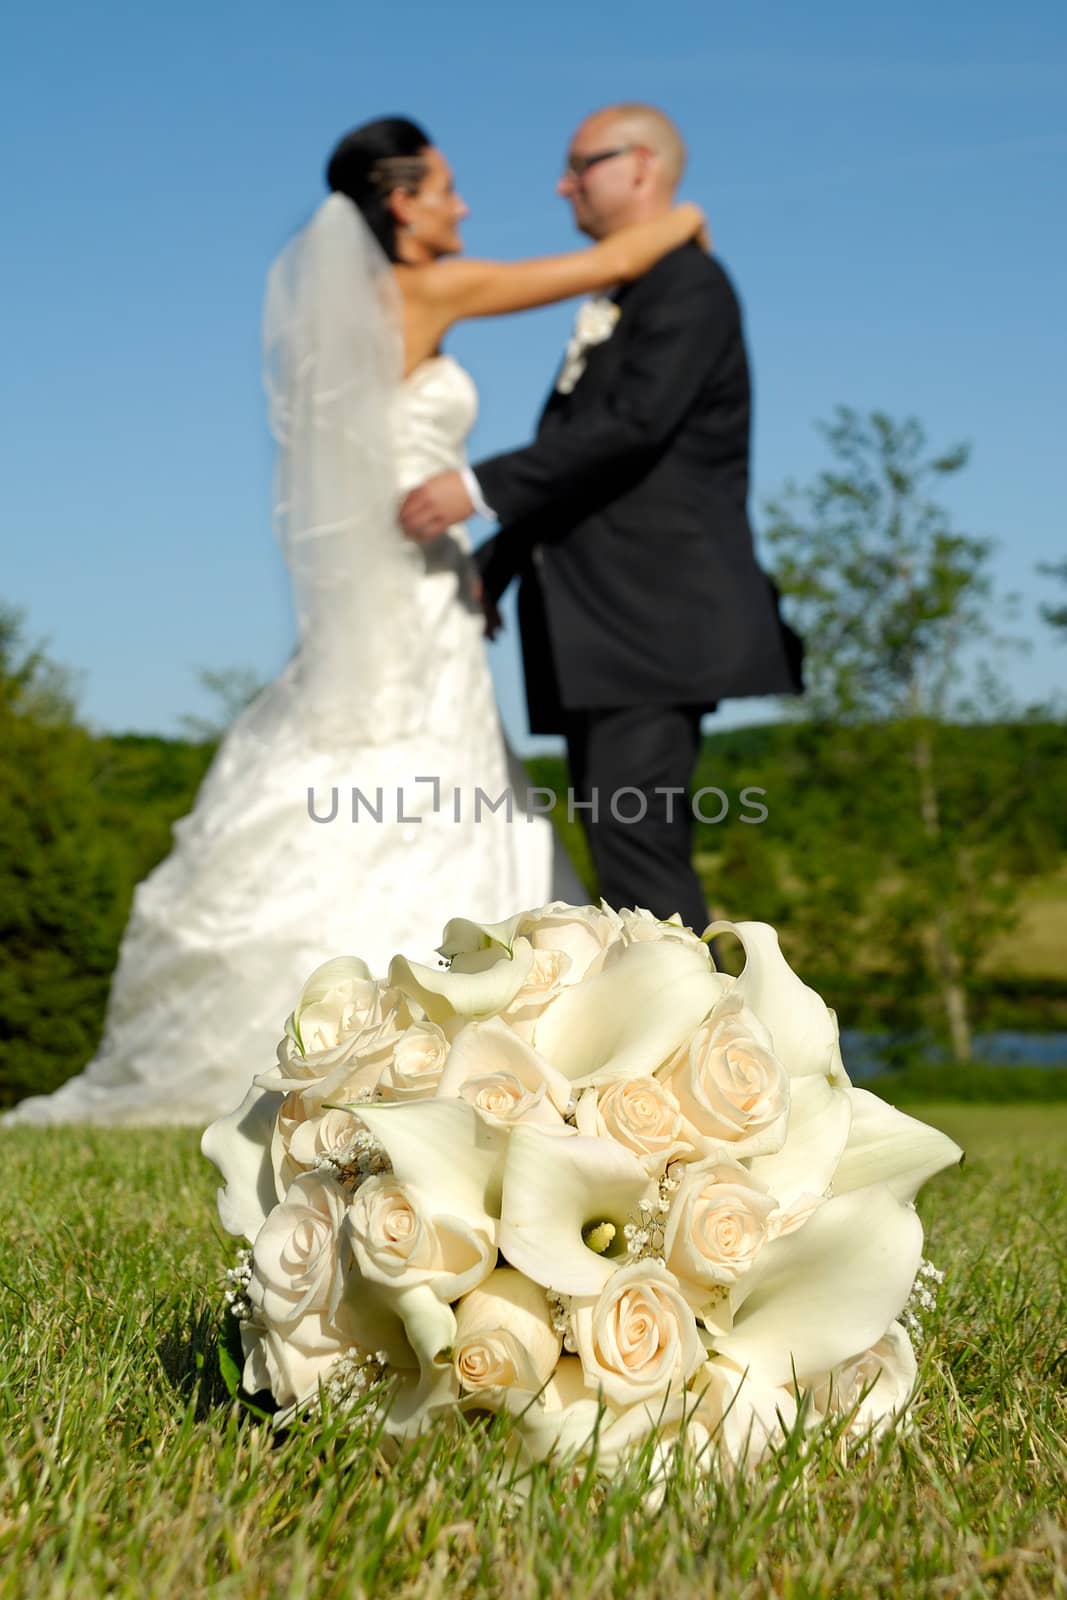 Wedding bouquet in grass in focus and wedding couple in the background.